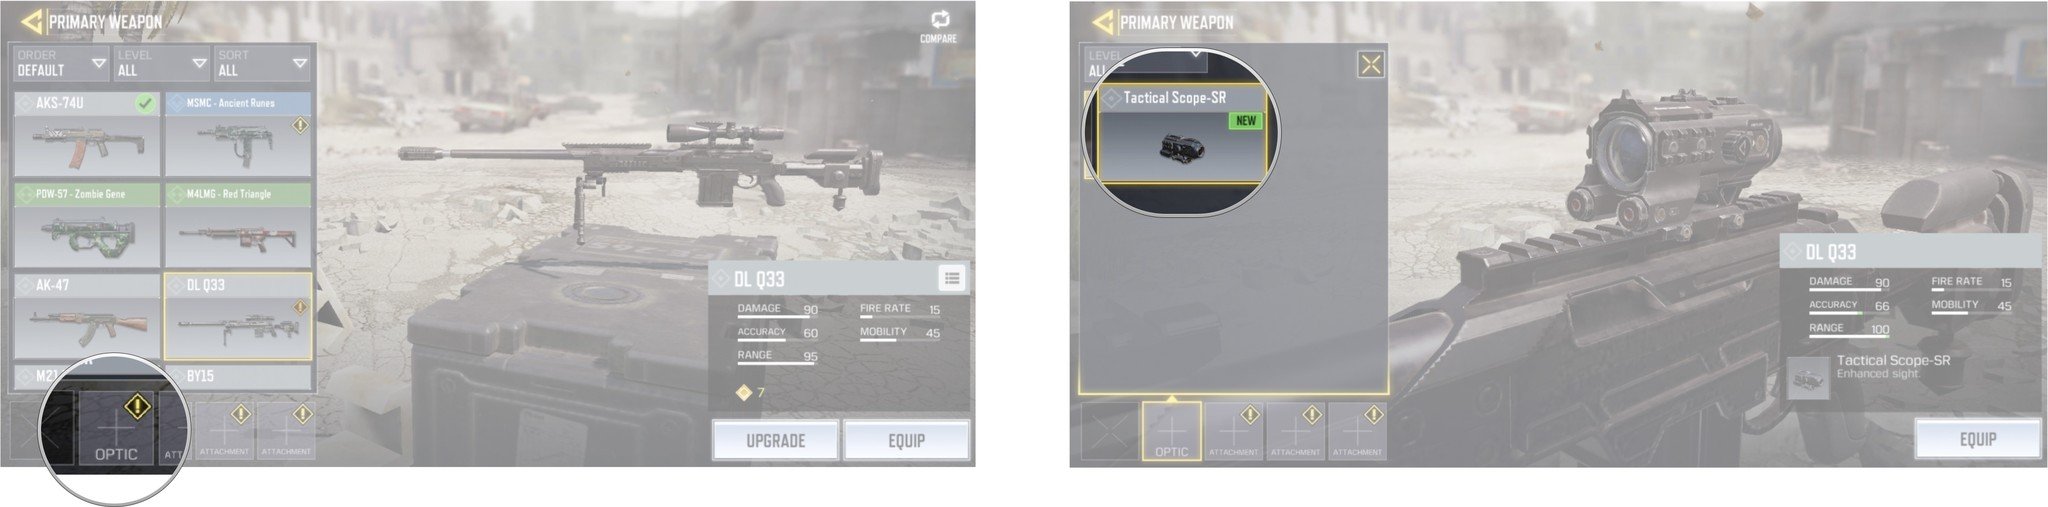 call of duty mobile equip upgrades